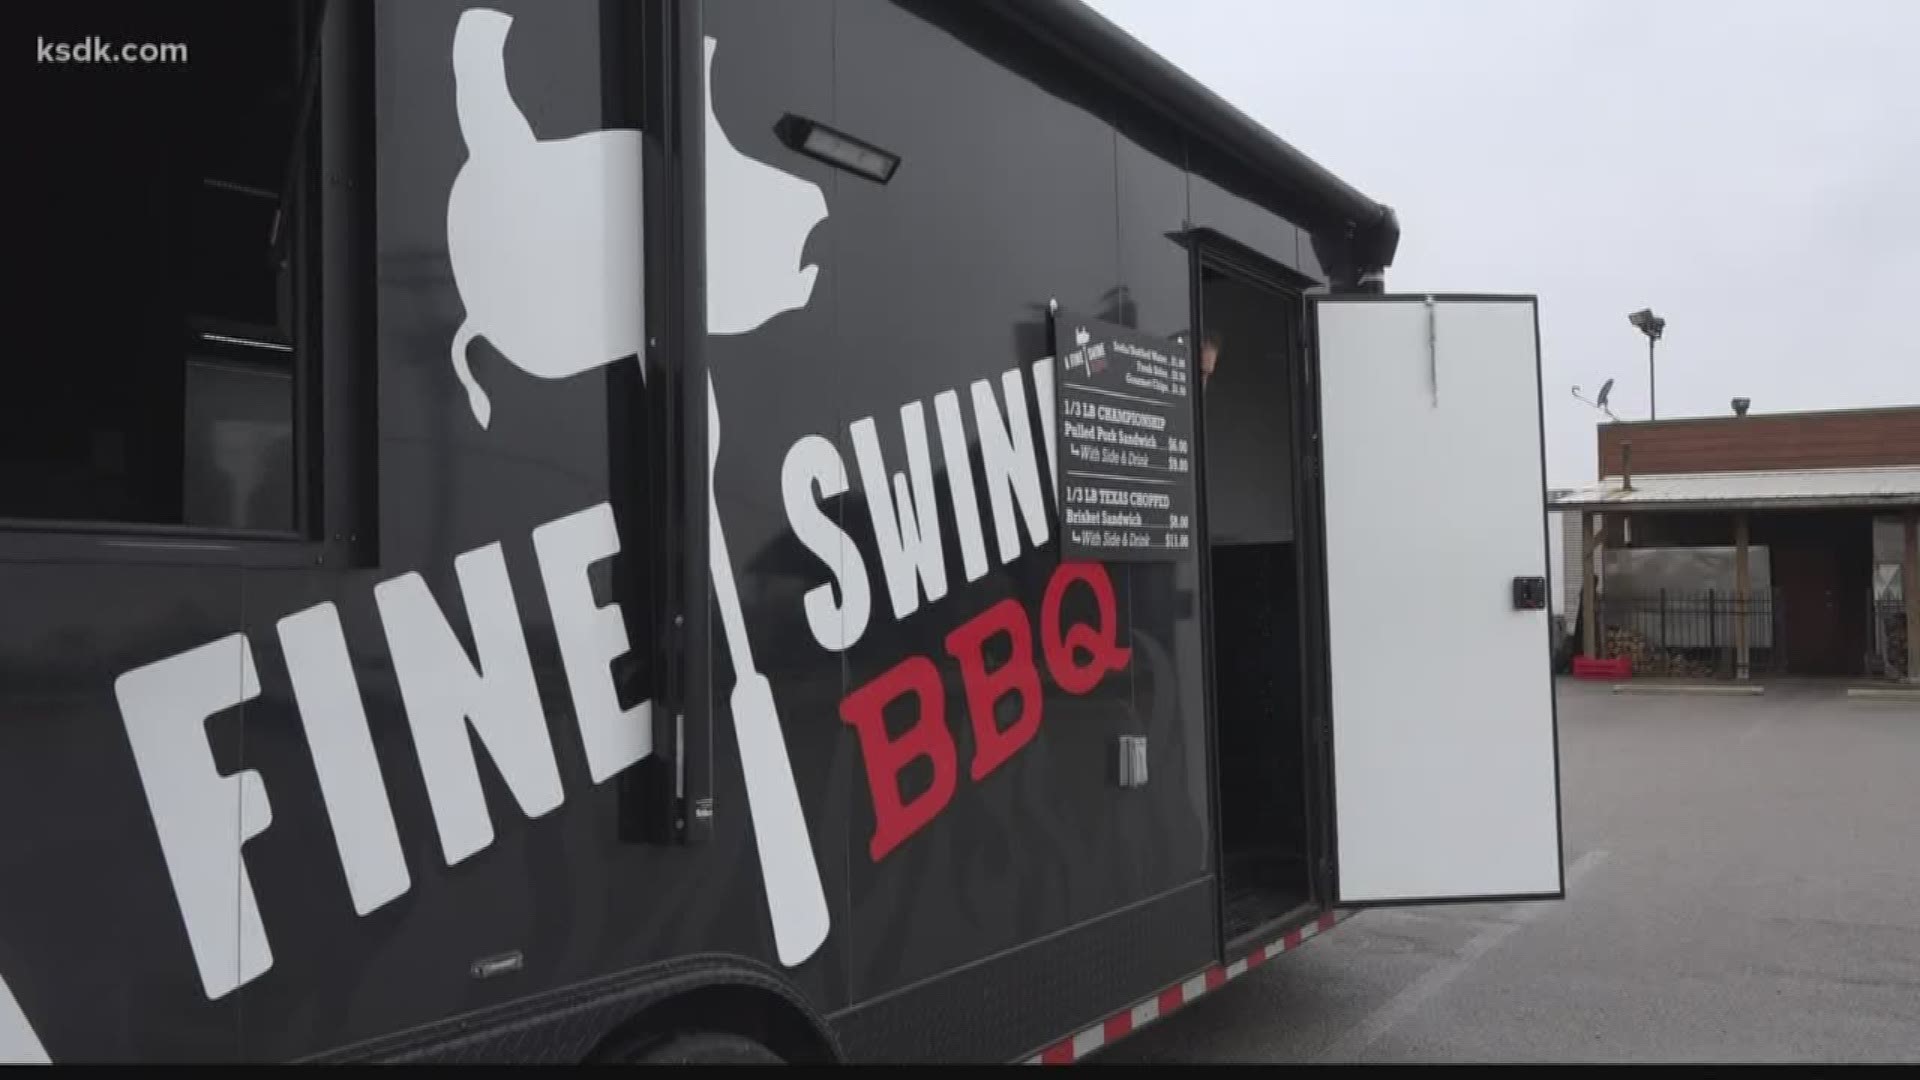 A Fine Swine BBQ is hoping to stay busy during temporary dine-in ban